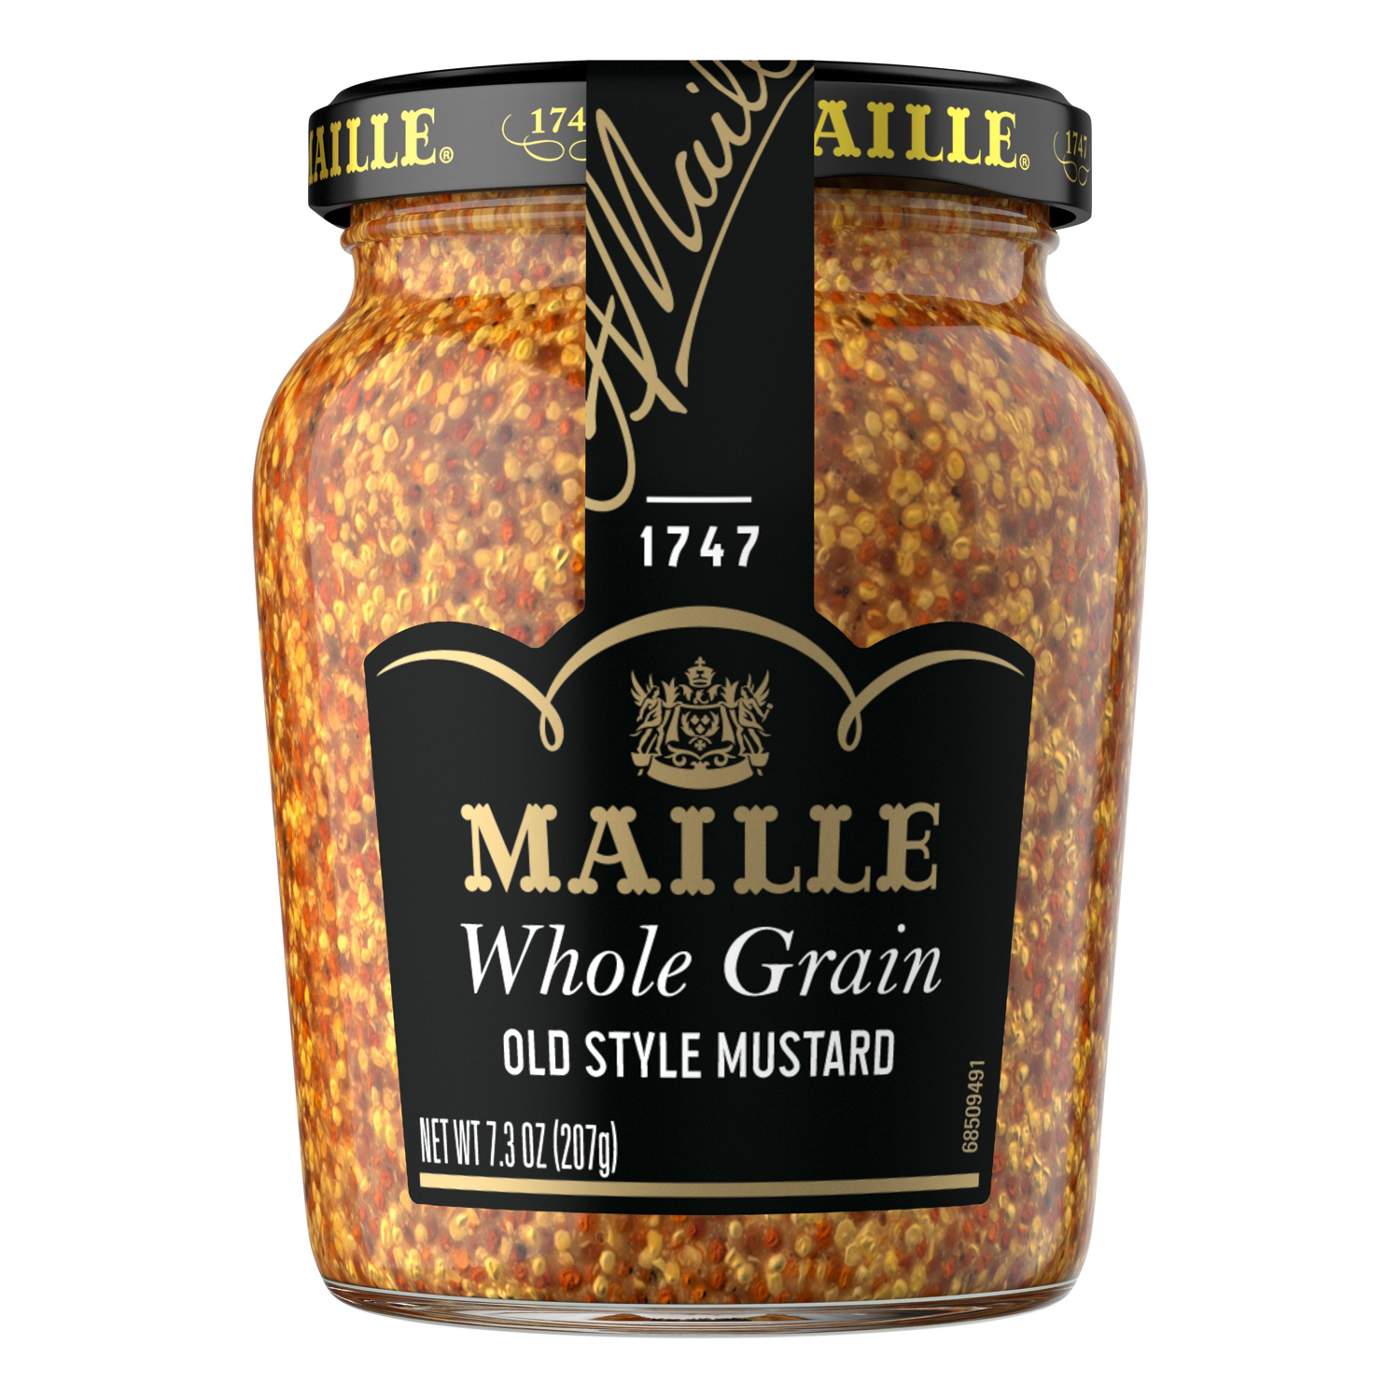 Maille Mustard Whole Grain Old Style Mustard; image 1 of 6